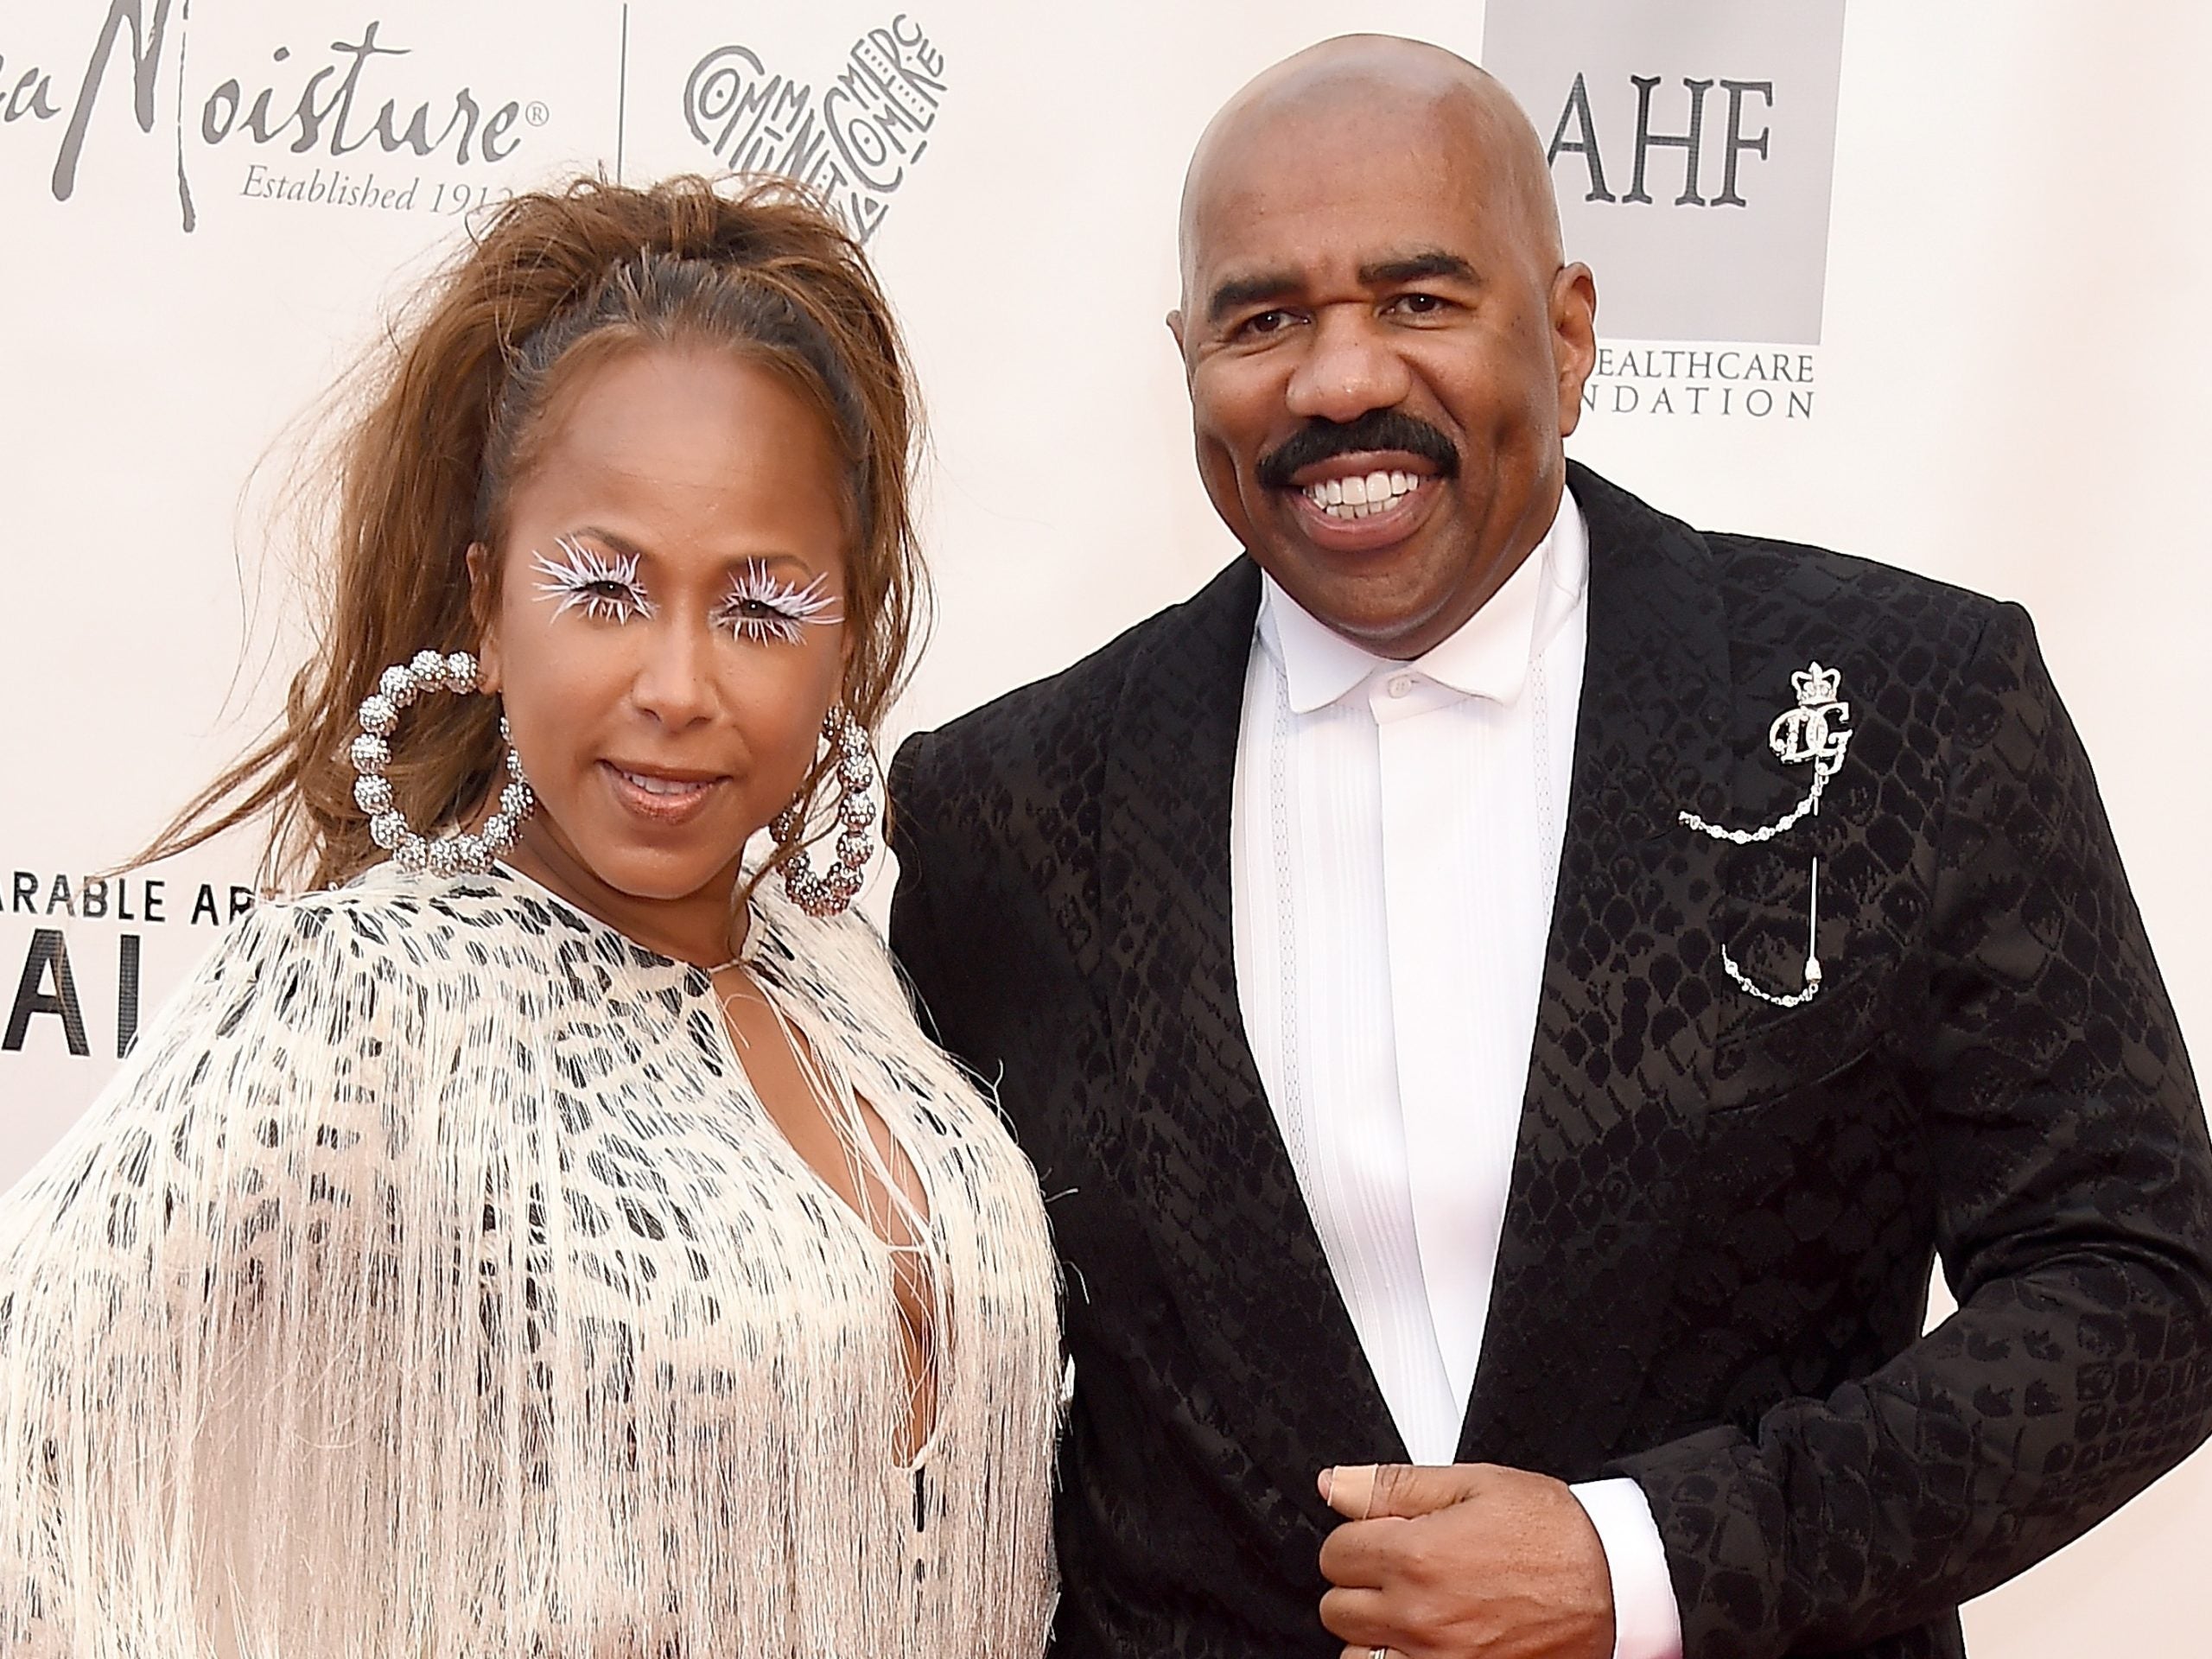 Steve And Marjorie Harvey Confront Cheating Rumors Claiming Their ‘Marriage Is Fine’ Despite The 'Foolishness and Lies'